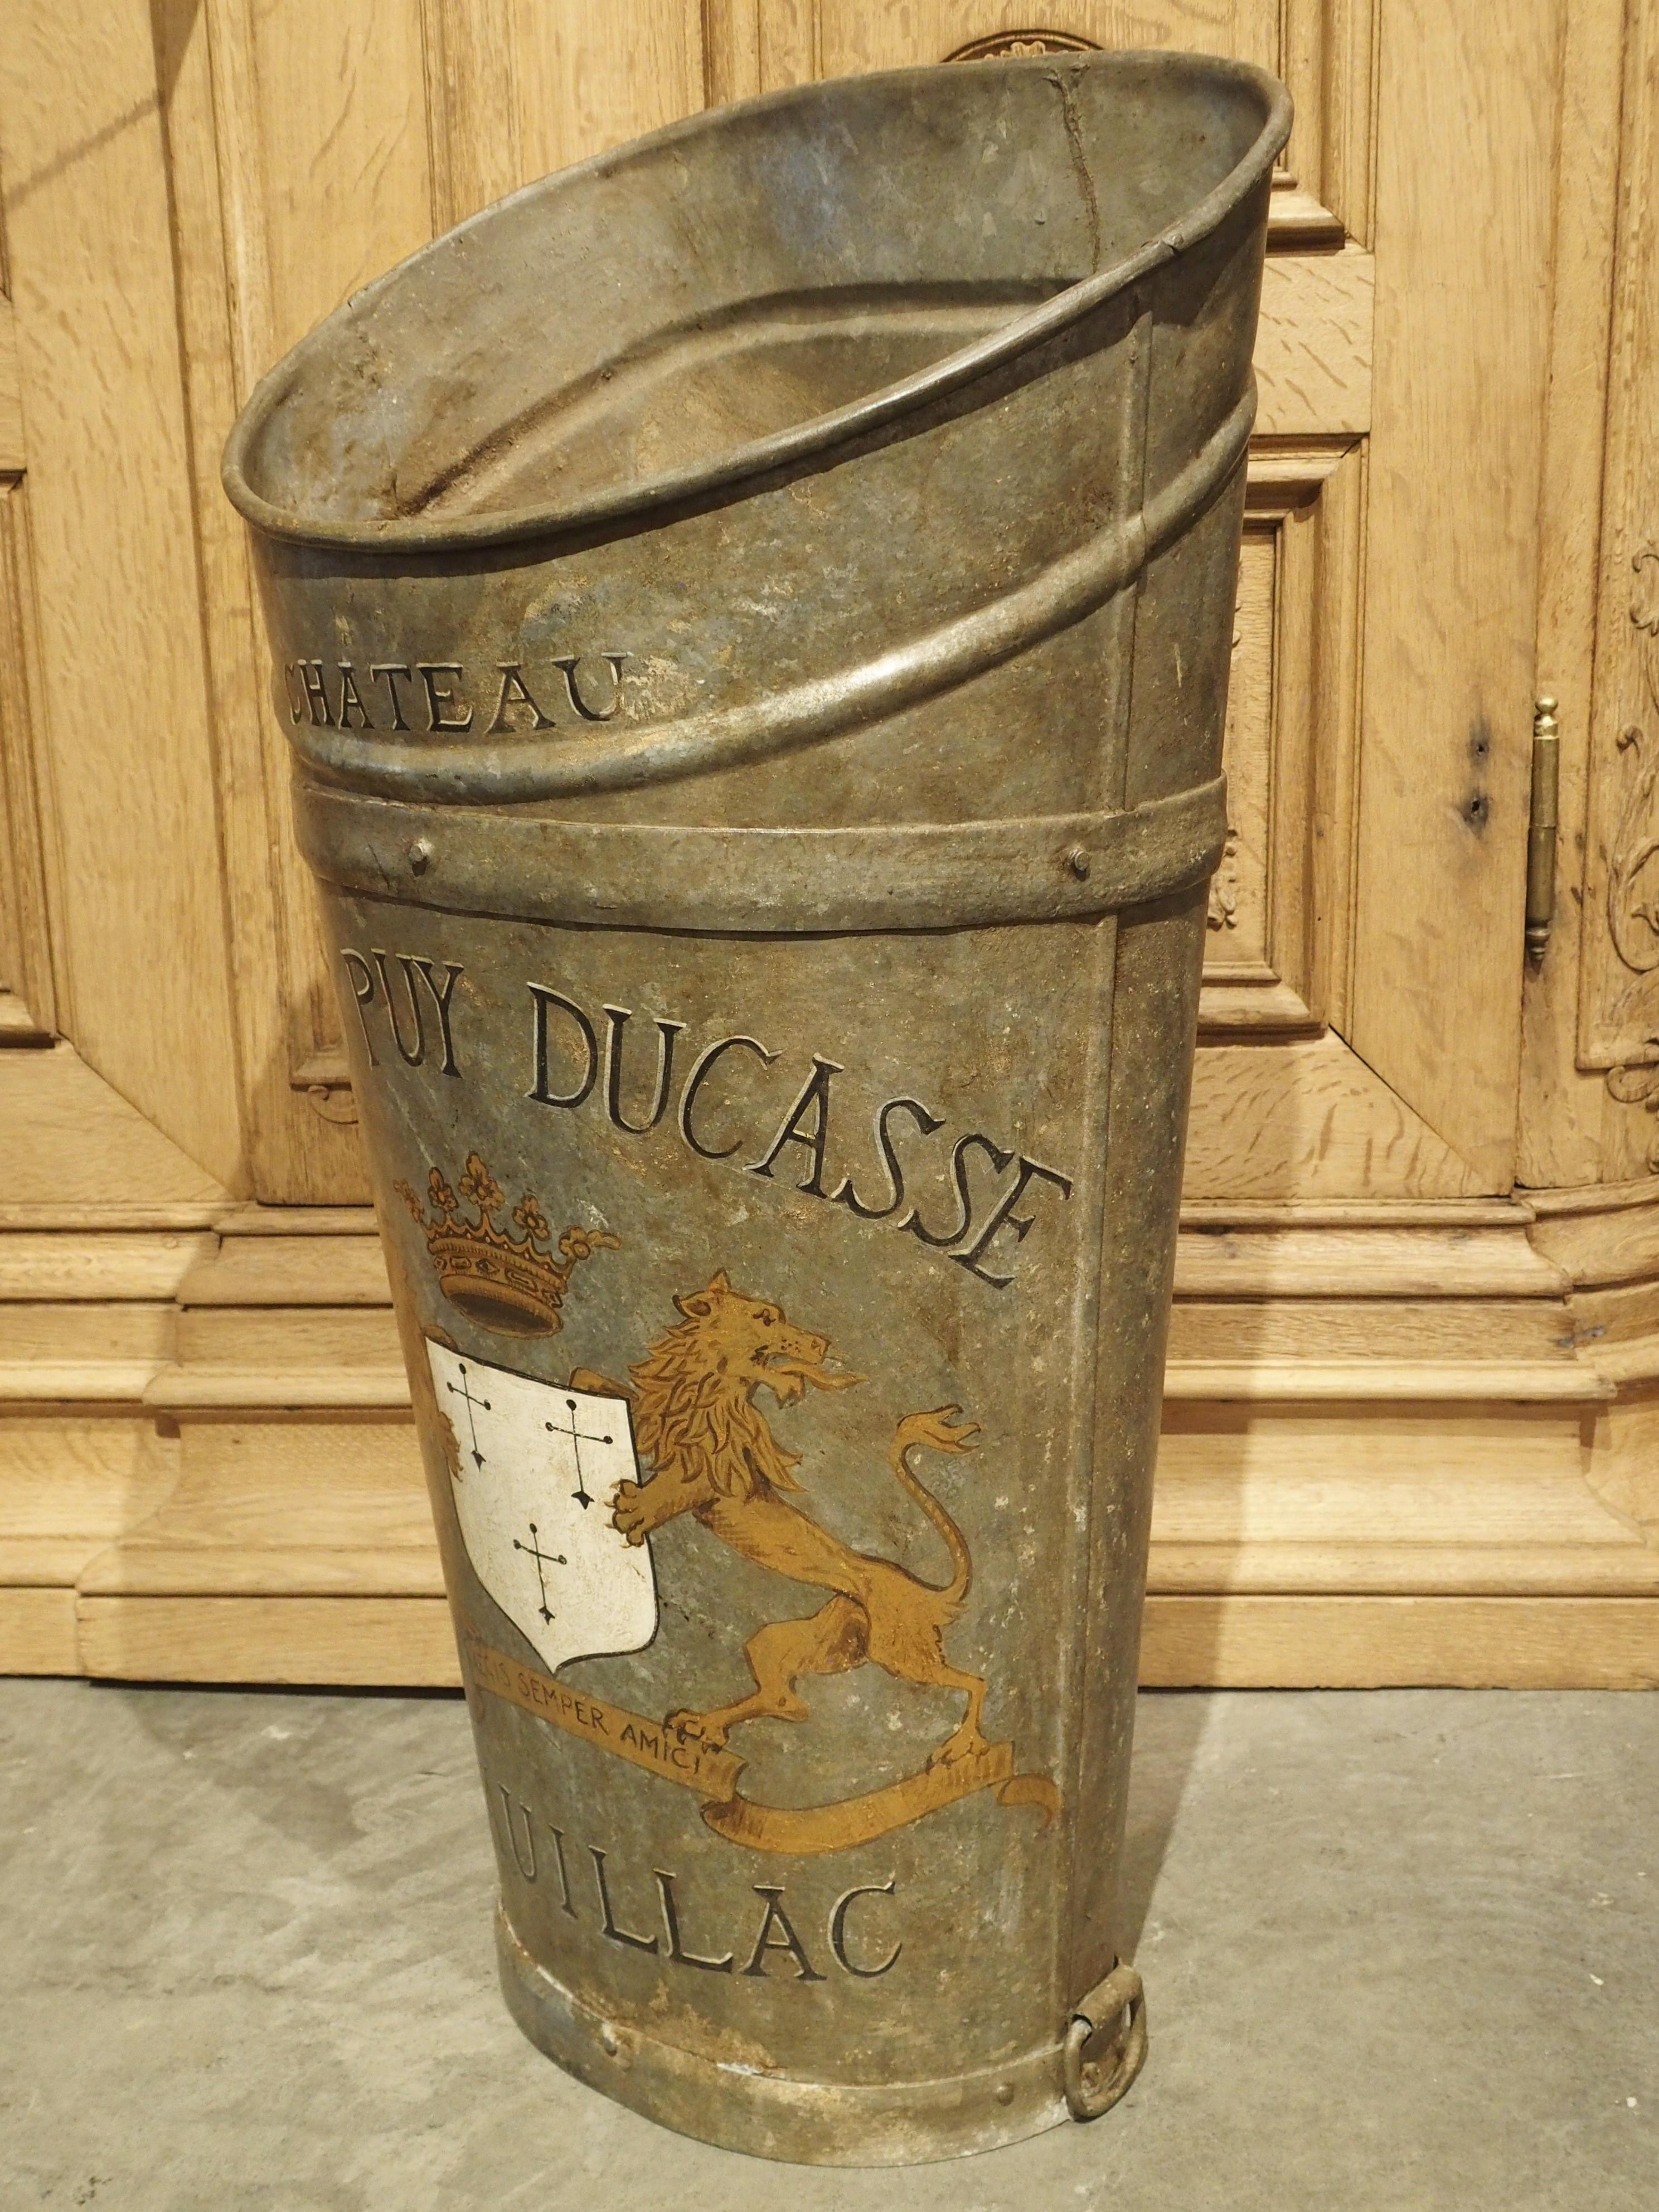 20th Century Painted French Grape Hotte, “Chateau Pauillac Grand Puy Ducasse”